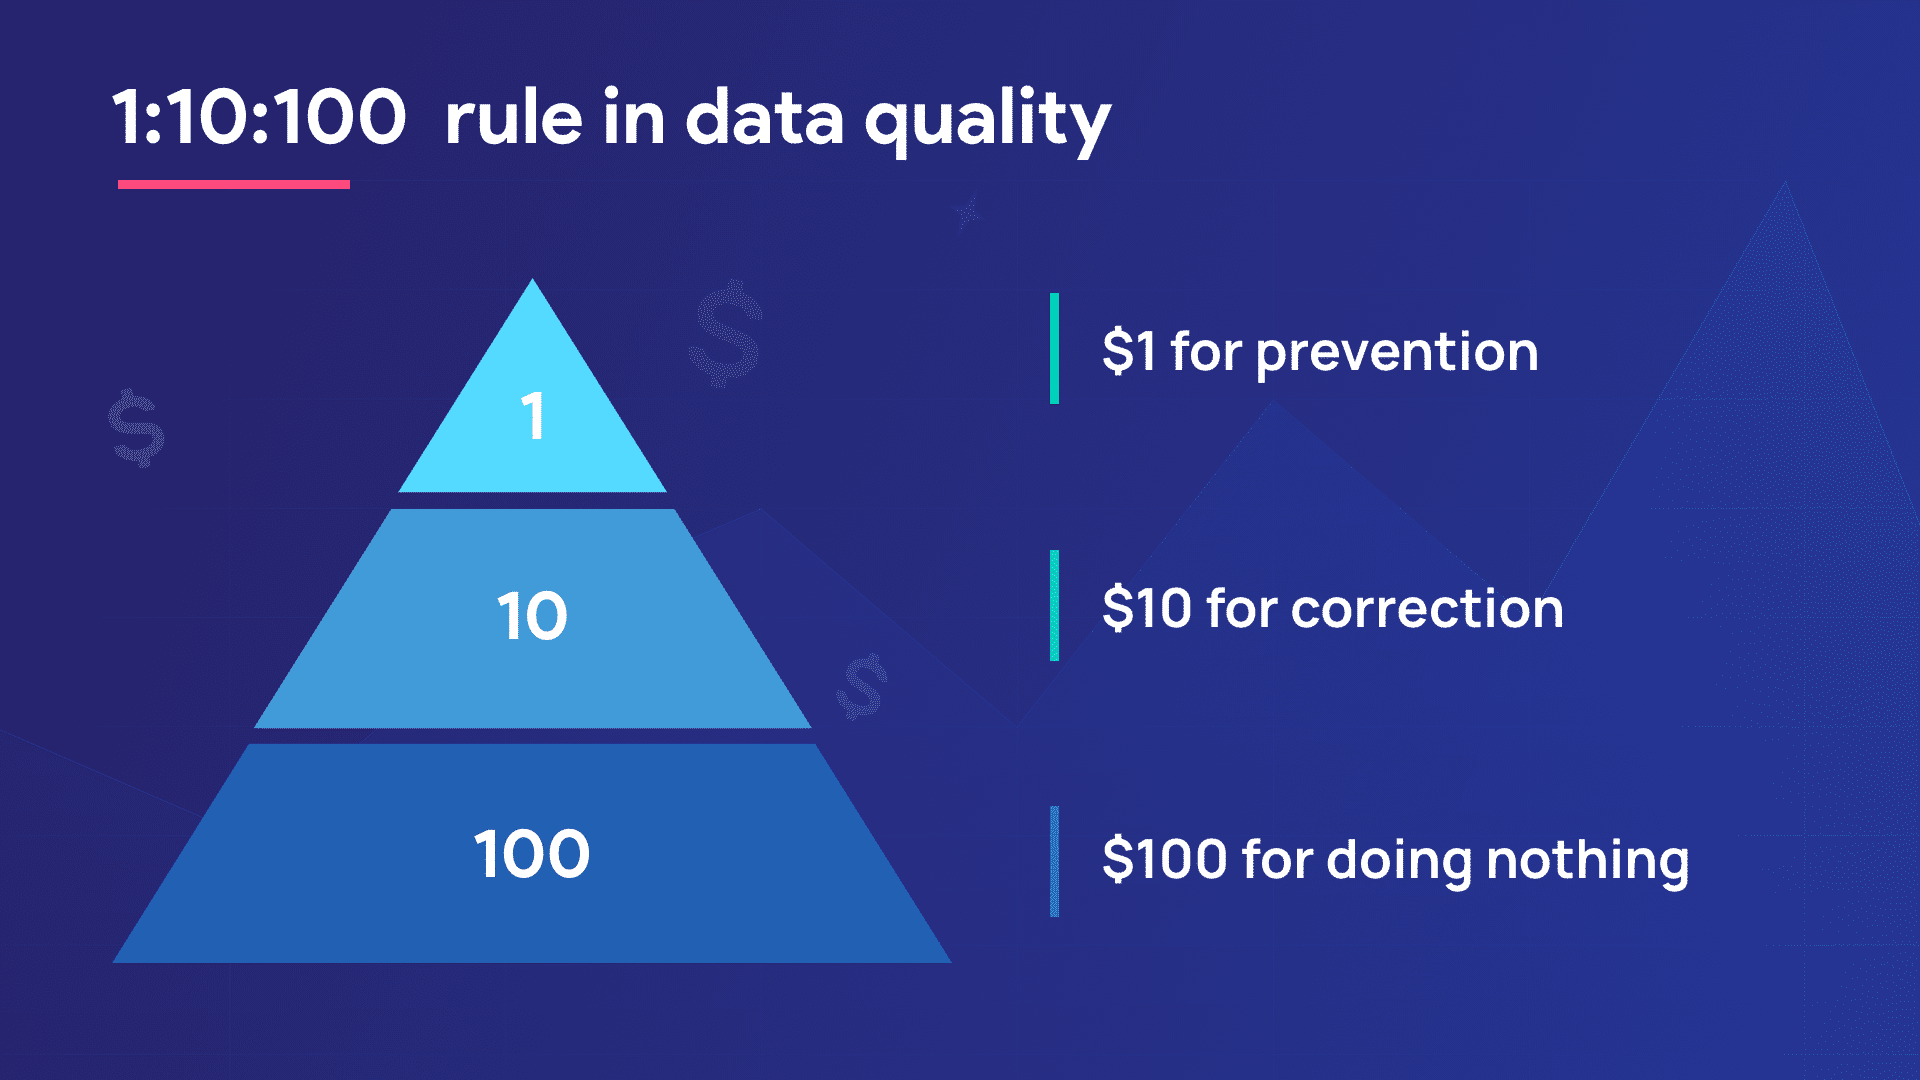 1:10:100 rule in data quality